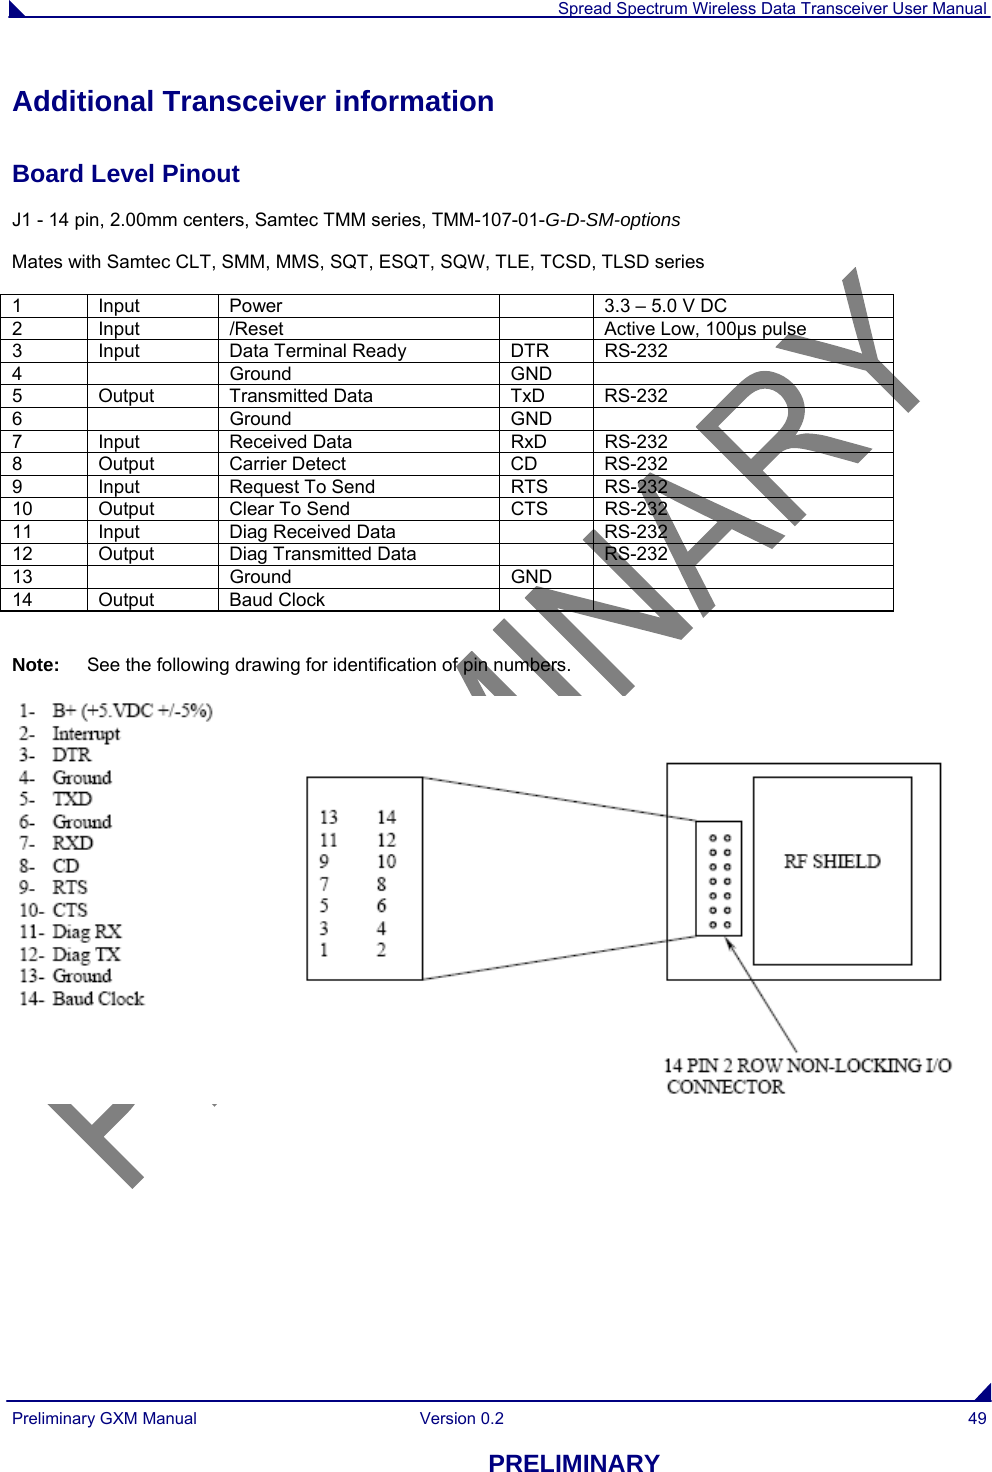  Spread Spectrum Wireless Data Transceiver User Manual Preliminary GXM Manual  Version 0.2  49 PRELIMINARY Additional Transceiver information Board Level Pinout J1 - 14 pin, 2.00mm centers, Samtec TMM series, TMM-107-01-G-D-SM-options Mates with Samtec CLT, SMM, MMS, SQT, ESQT, SQW, TLE, TCSD, TLSD series 1  Input  Power    3.3 – 5.0 V DC 2  Input  /Reset    Active Low, 100μs pulse 3 Input  Data Terminal Ready  DTR RS-232 4   Ground  GND  5 Output Transmitted Data  TxD RS-232 6   Ground  GND  7 Input  Received Data  RxD RS-232 8 Output Carrier Detect  CD RS-232 9  Input  Request To Send  RTS  RS-232 10  Output  Clear To Send  CTS  RS-232 11 Input  Diag Received Data    RS-232 12  Output  Diag Transmitted Data    RS-232 13   Ground  GND  14 Output  Baud Clock      Note:   See the following drawing for identification of pin numbers. 